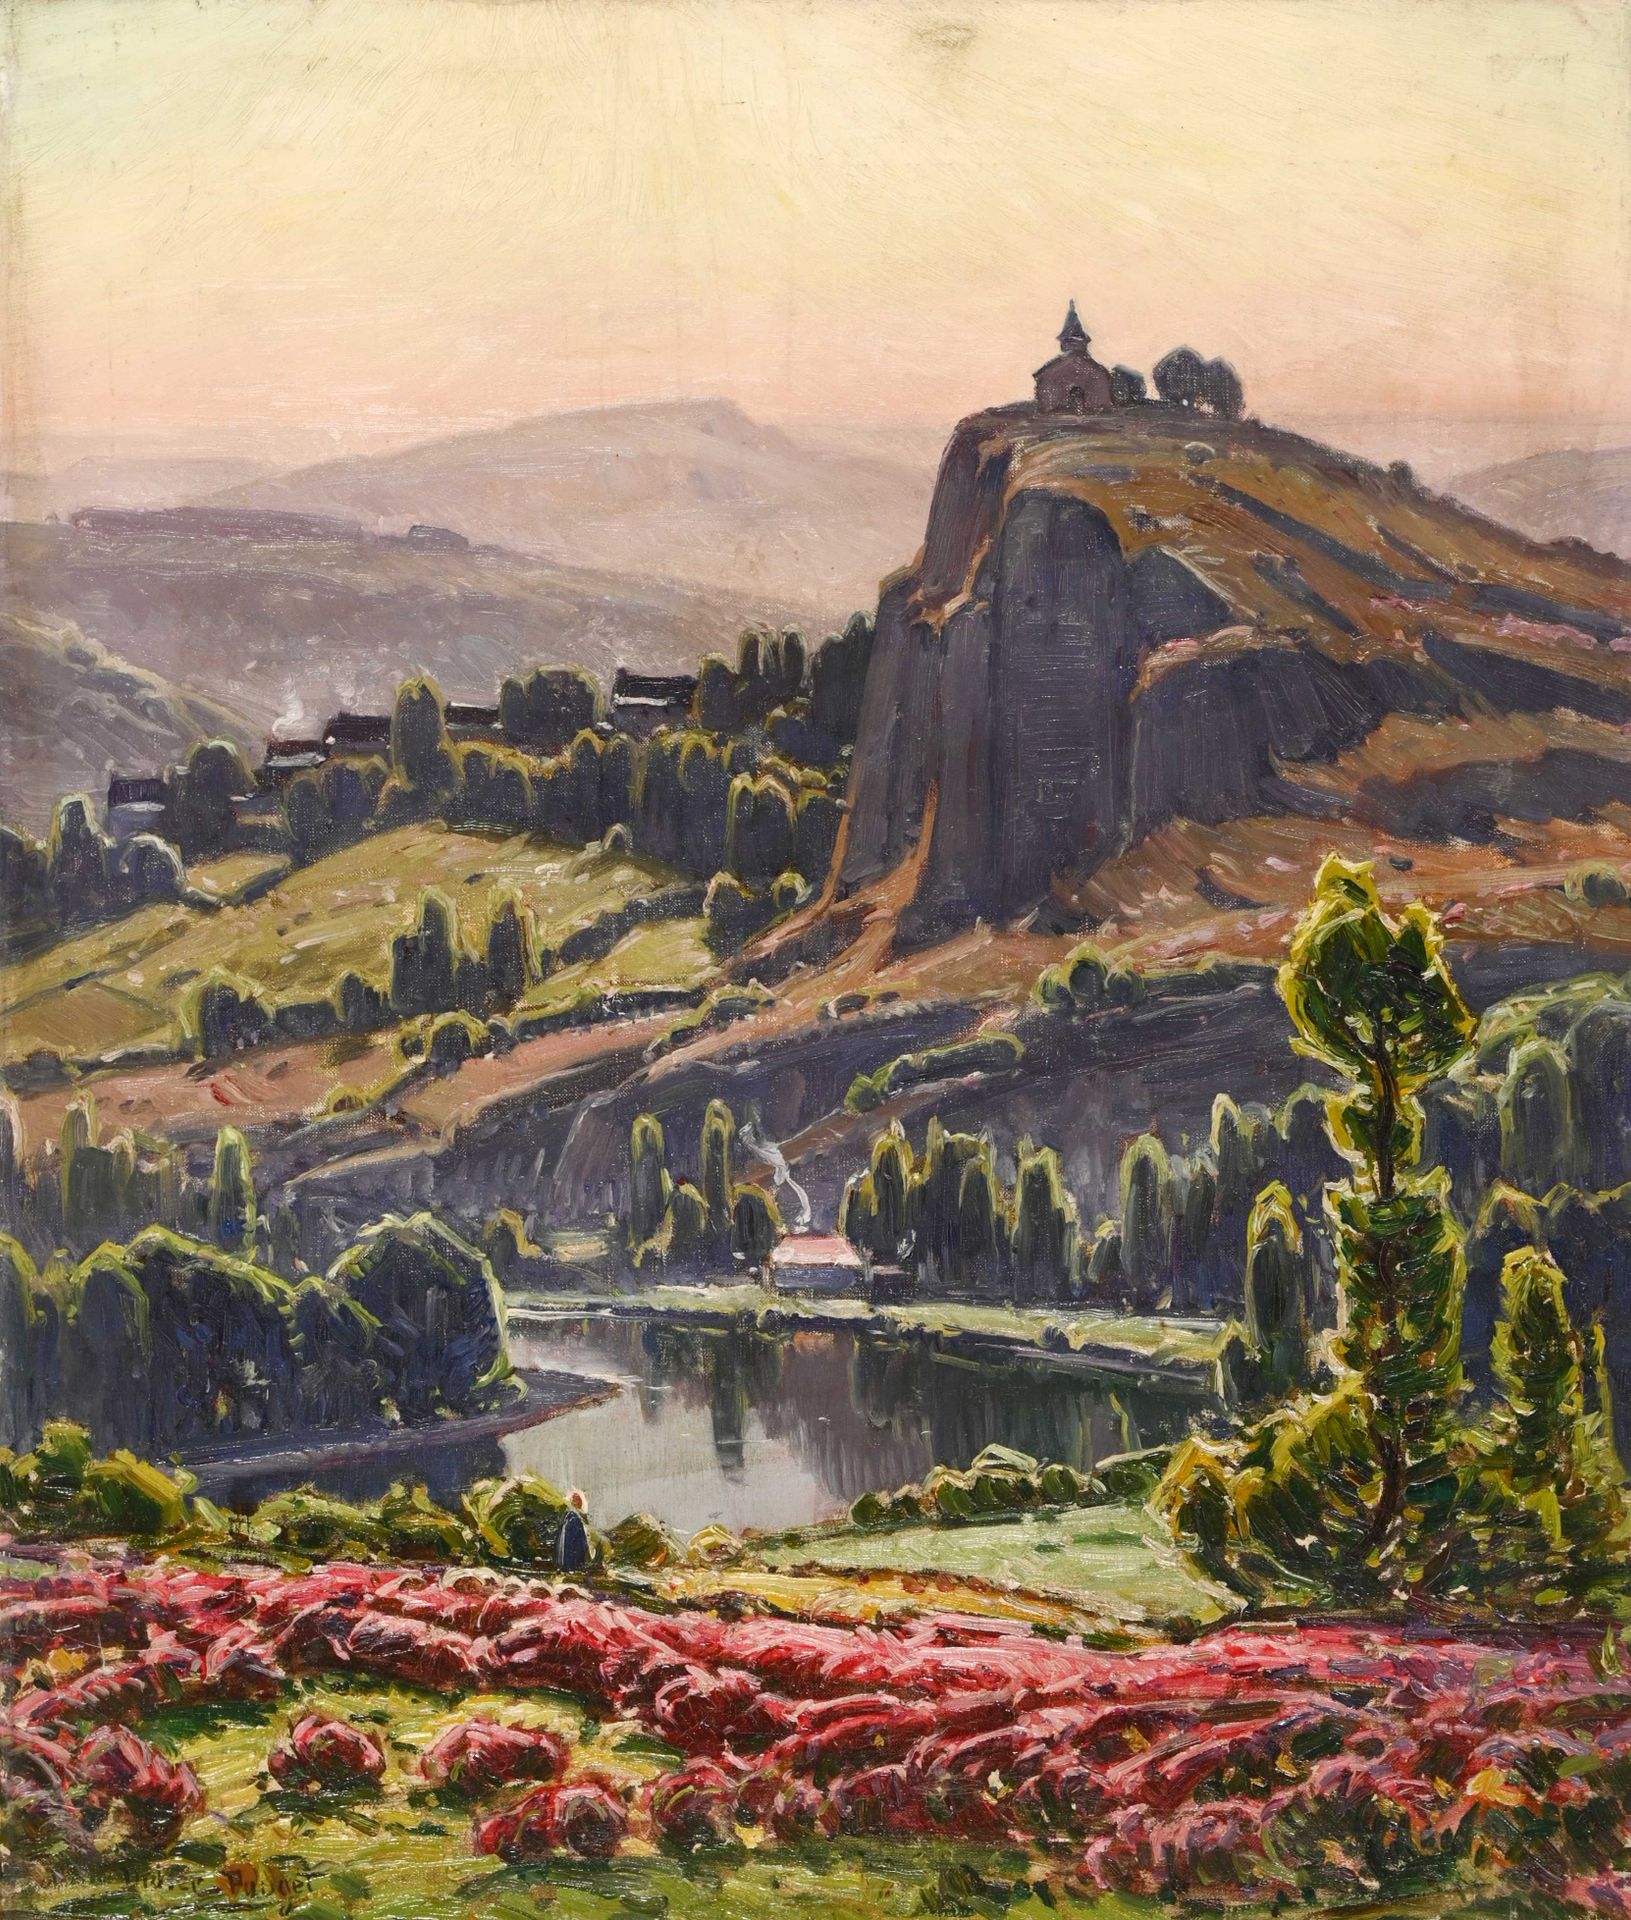 Null William DIDIER-POUGET (1864-1959) "Valle dell'Aveyron" hst sbg 55x45